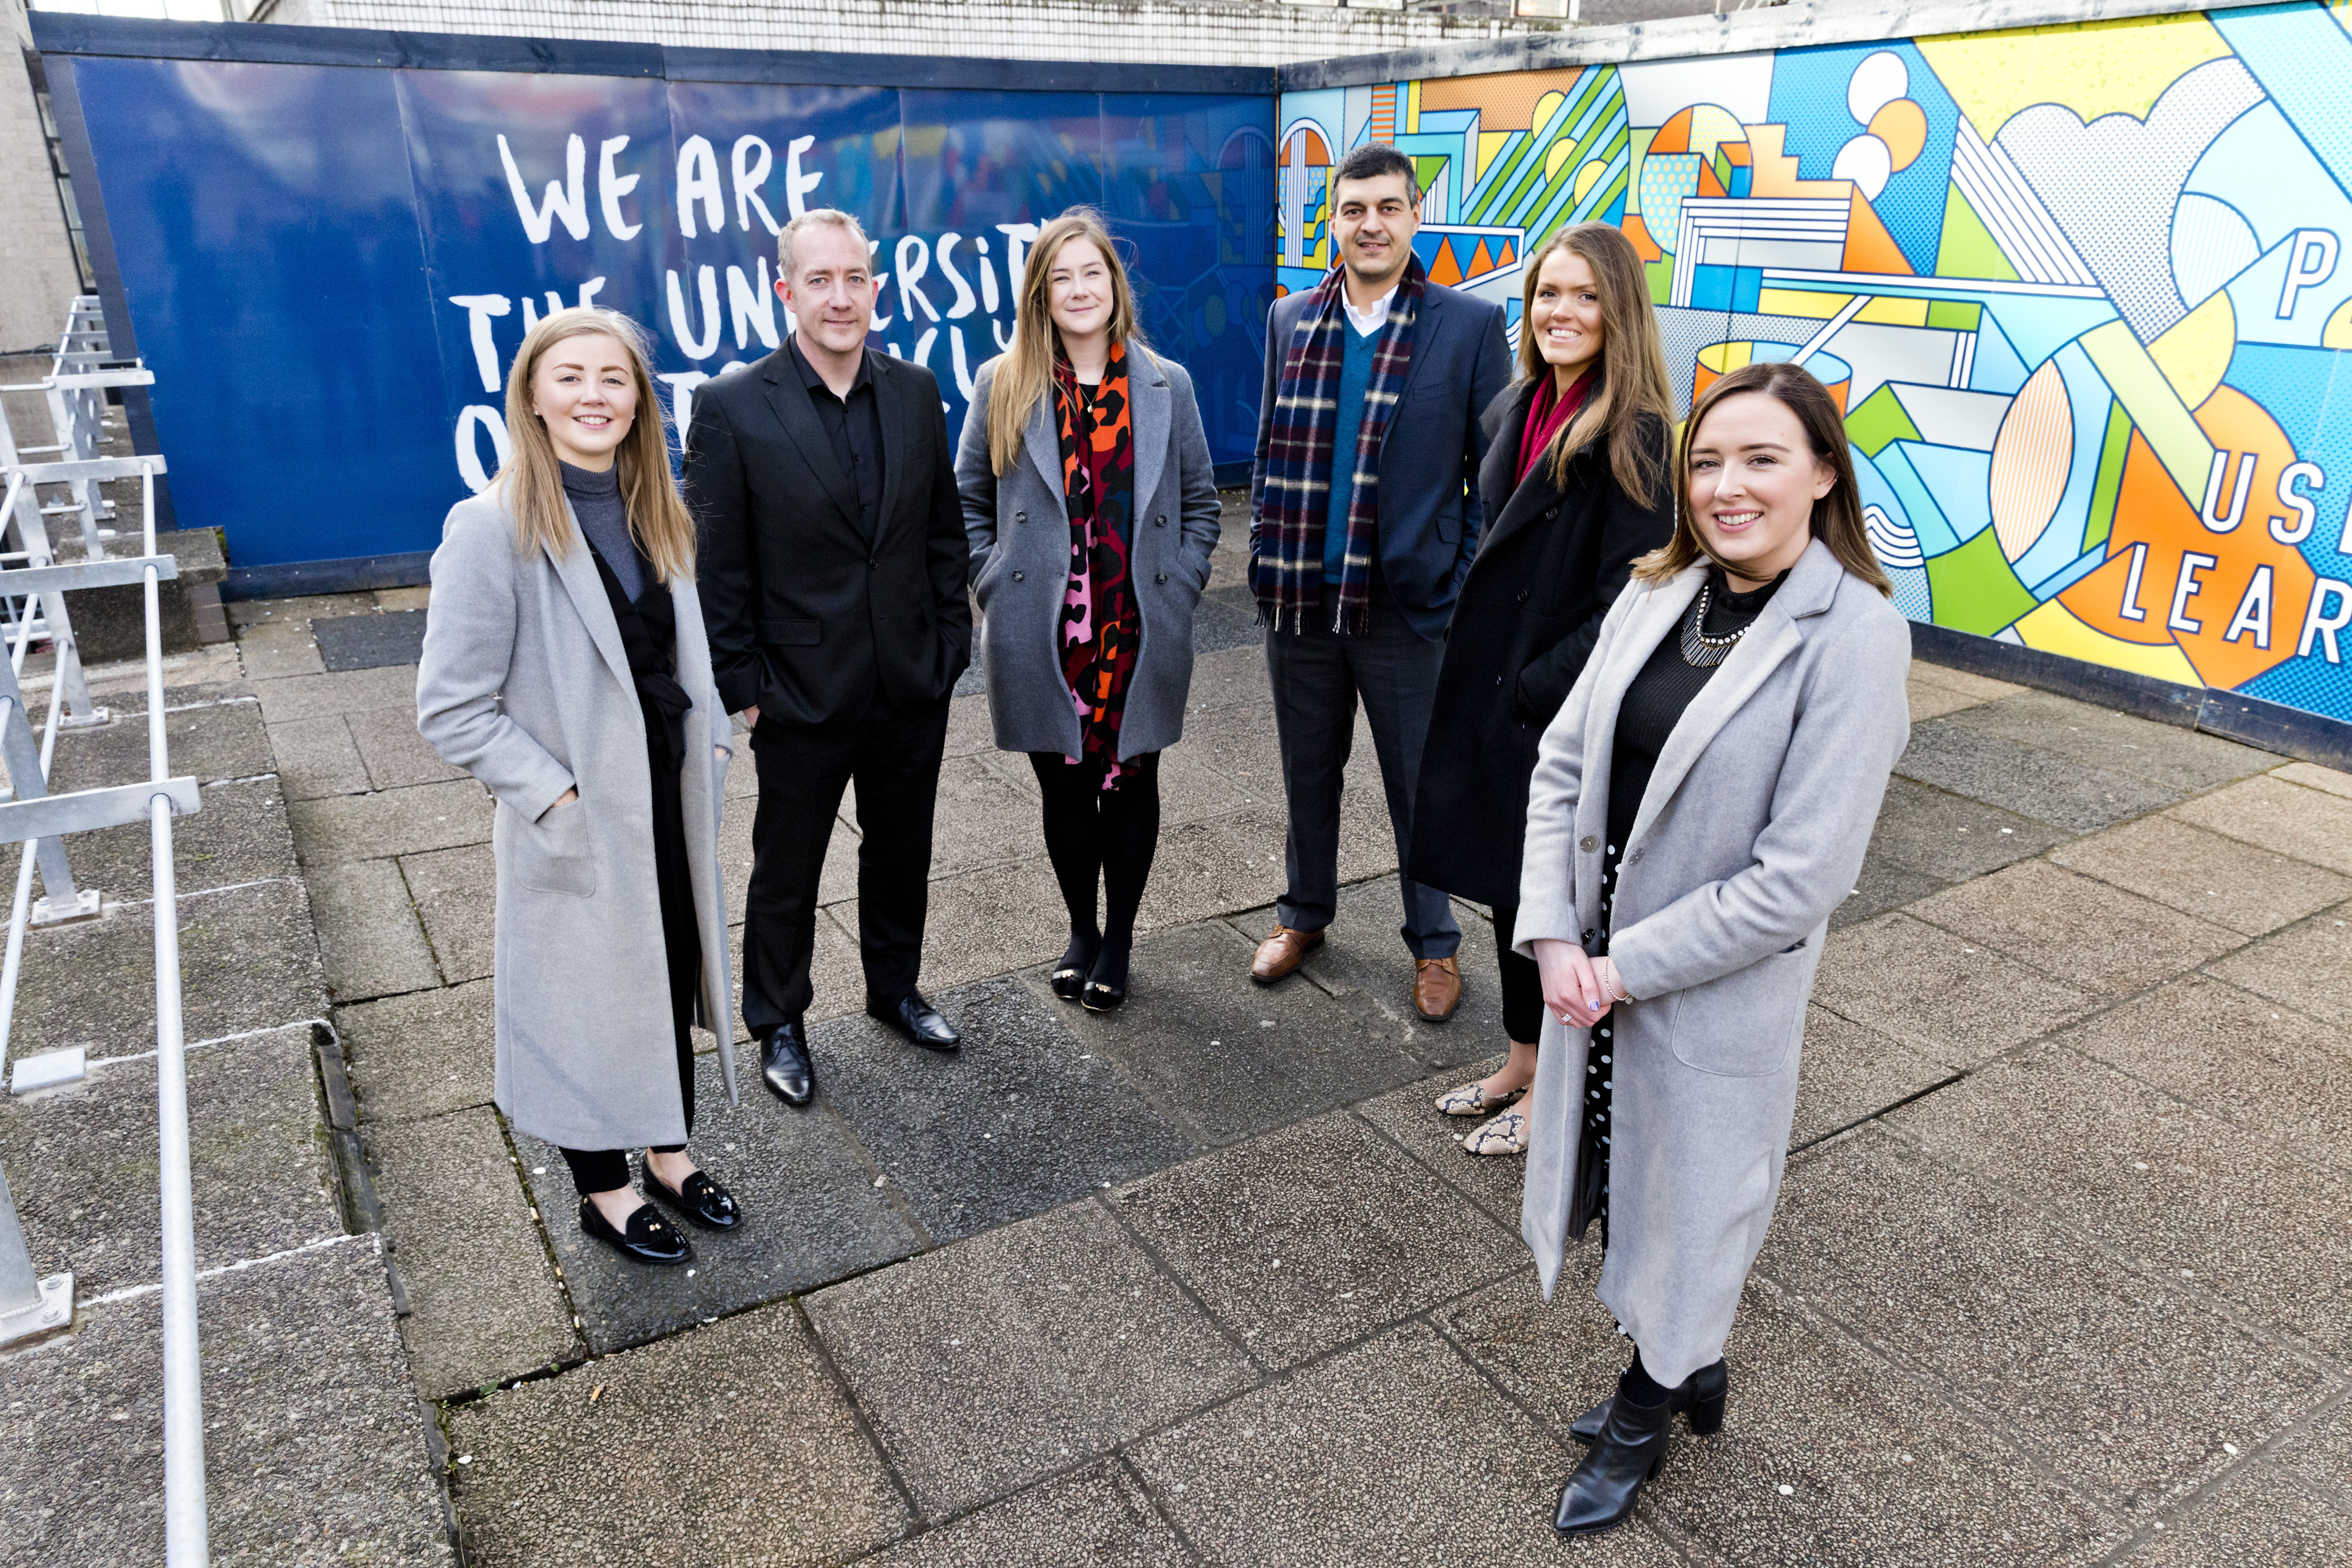 Taylor Wimpey returns to Strathclyde Business School MPD to tap into future talent pool